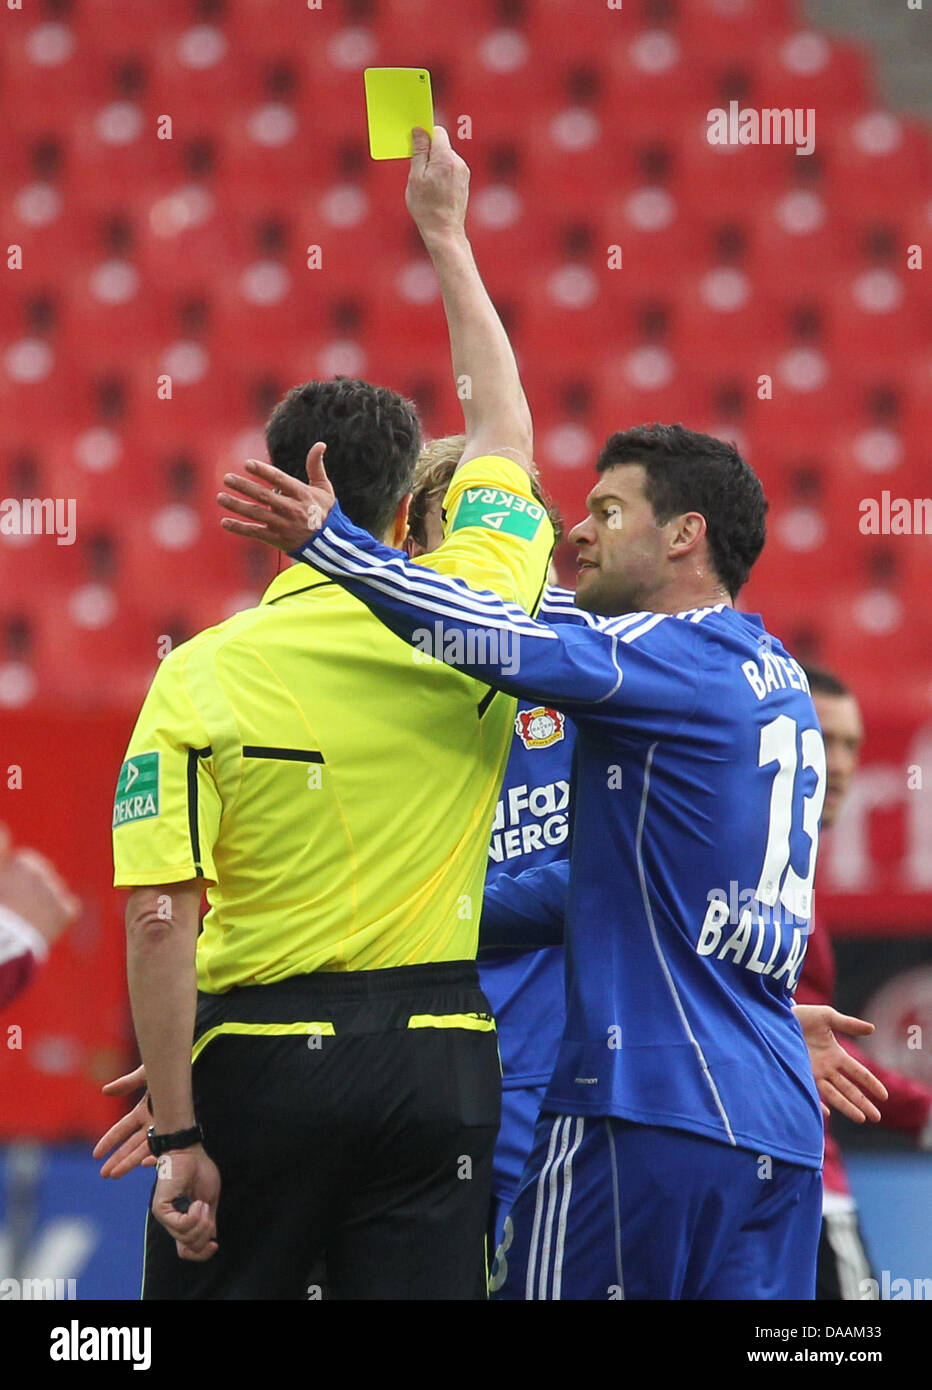 Leverkusen's Michael Ballack (R) argues with the referee Knut Kircher after Ballack's teammate Simon Rolfes (covered, back) recieves the yellow card during the Bundesliga soccer match between 1st FC Nuremberg and Bayer 04 Leverkusen at the easyCredit Stadion in Nuremberg, Germany, 5 February 2011. Photo: Daniel Karmann Stock Photo